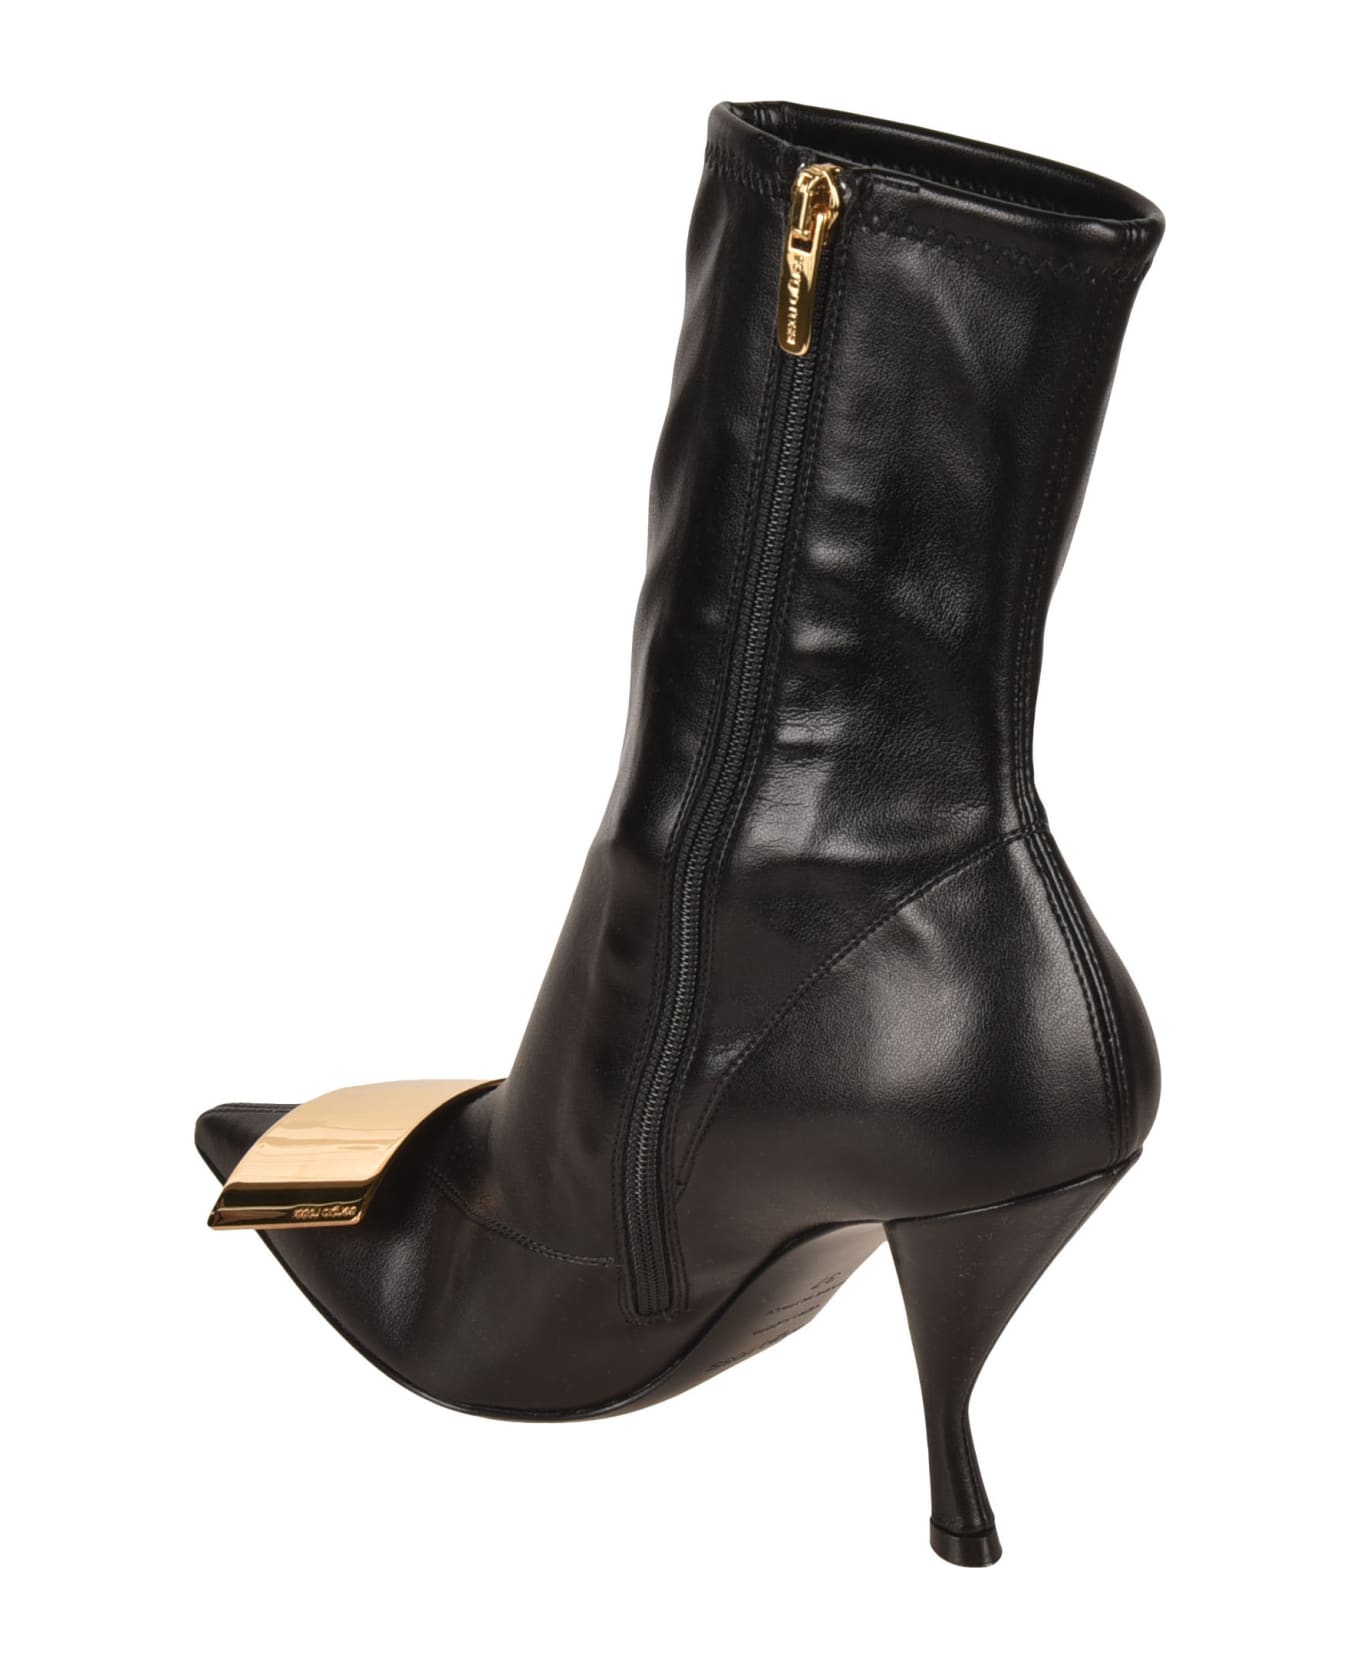 Sergio Rossi Pointed Toe Side Zip Boots - Black